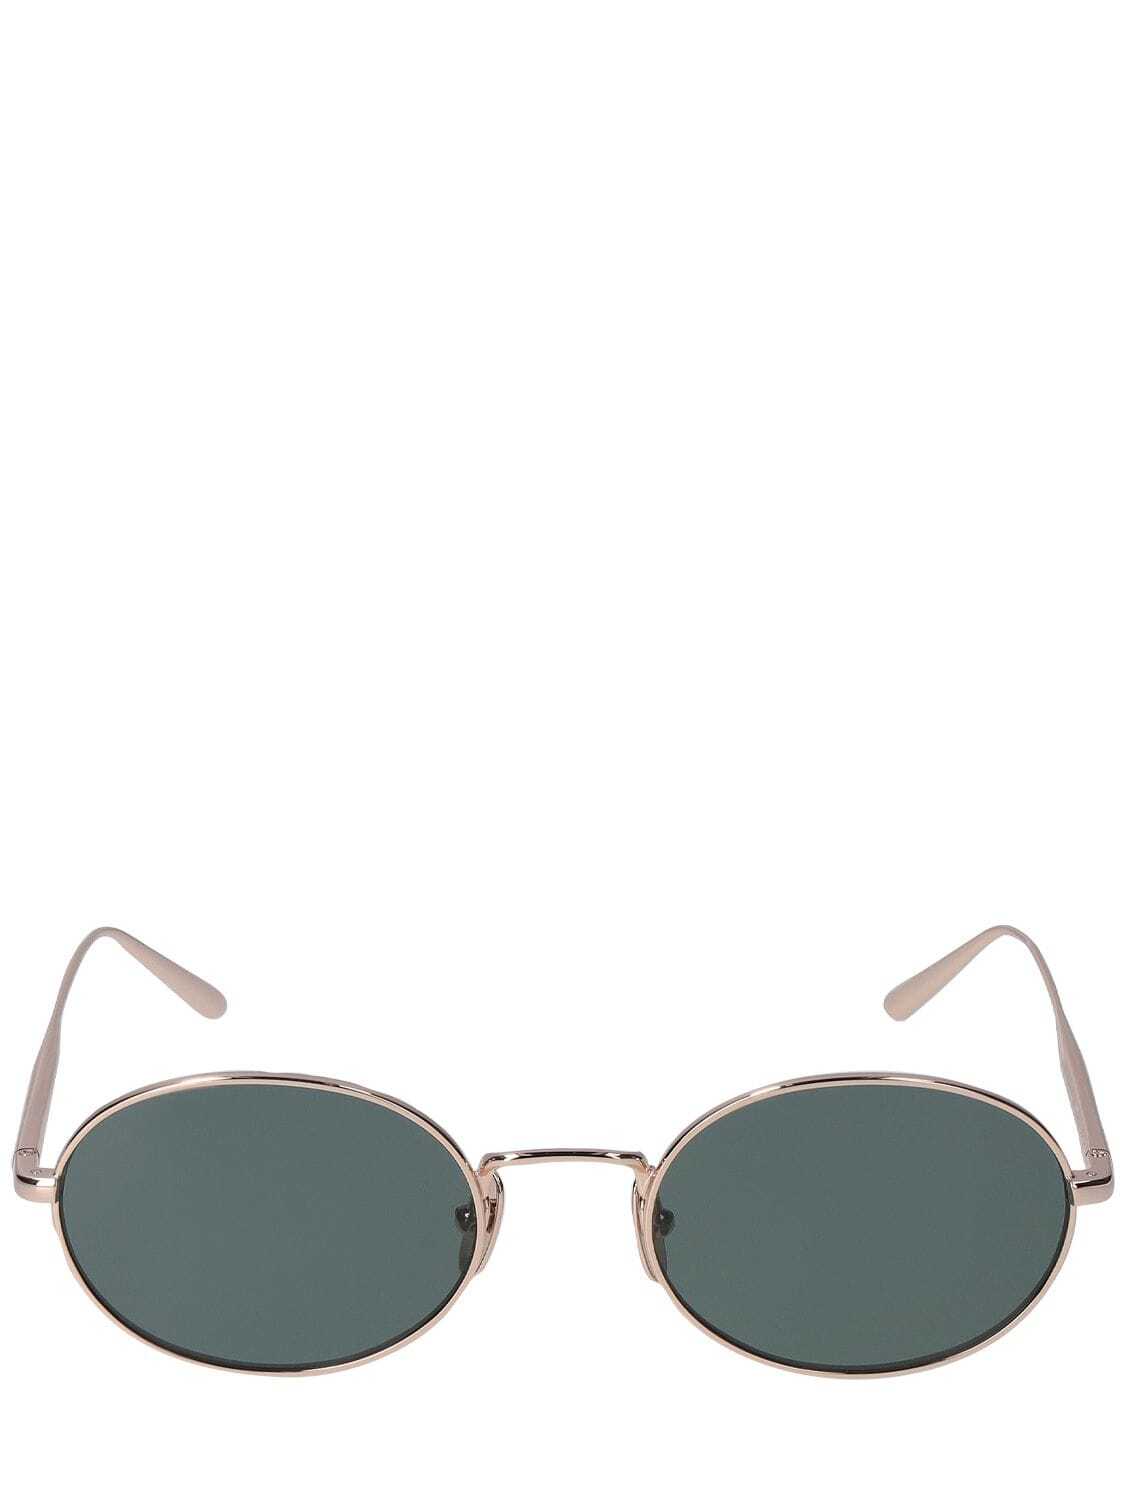 CHIMI Oval Green Stainless Steel Sunglasses